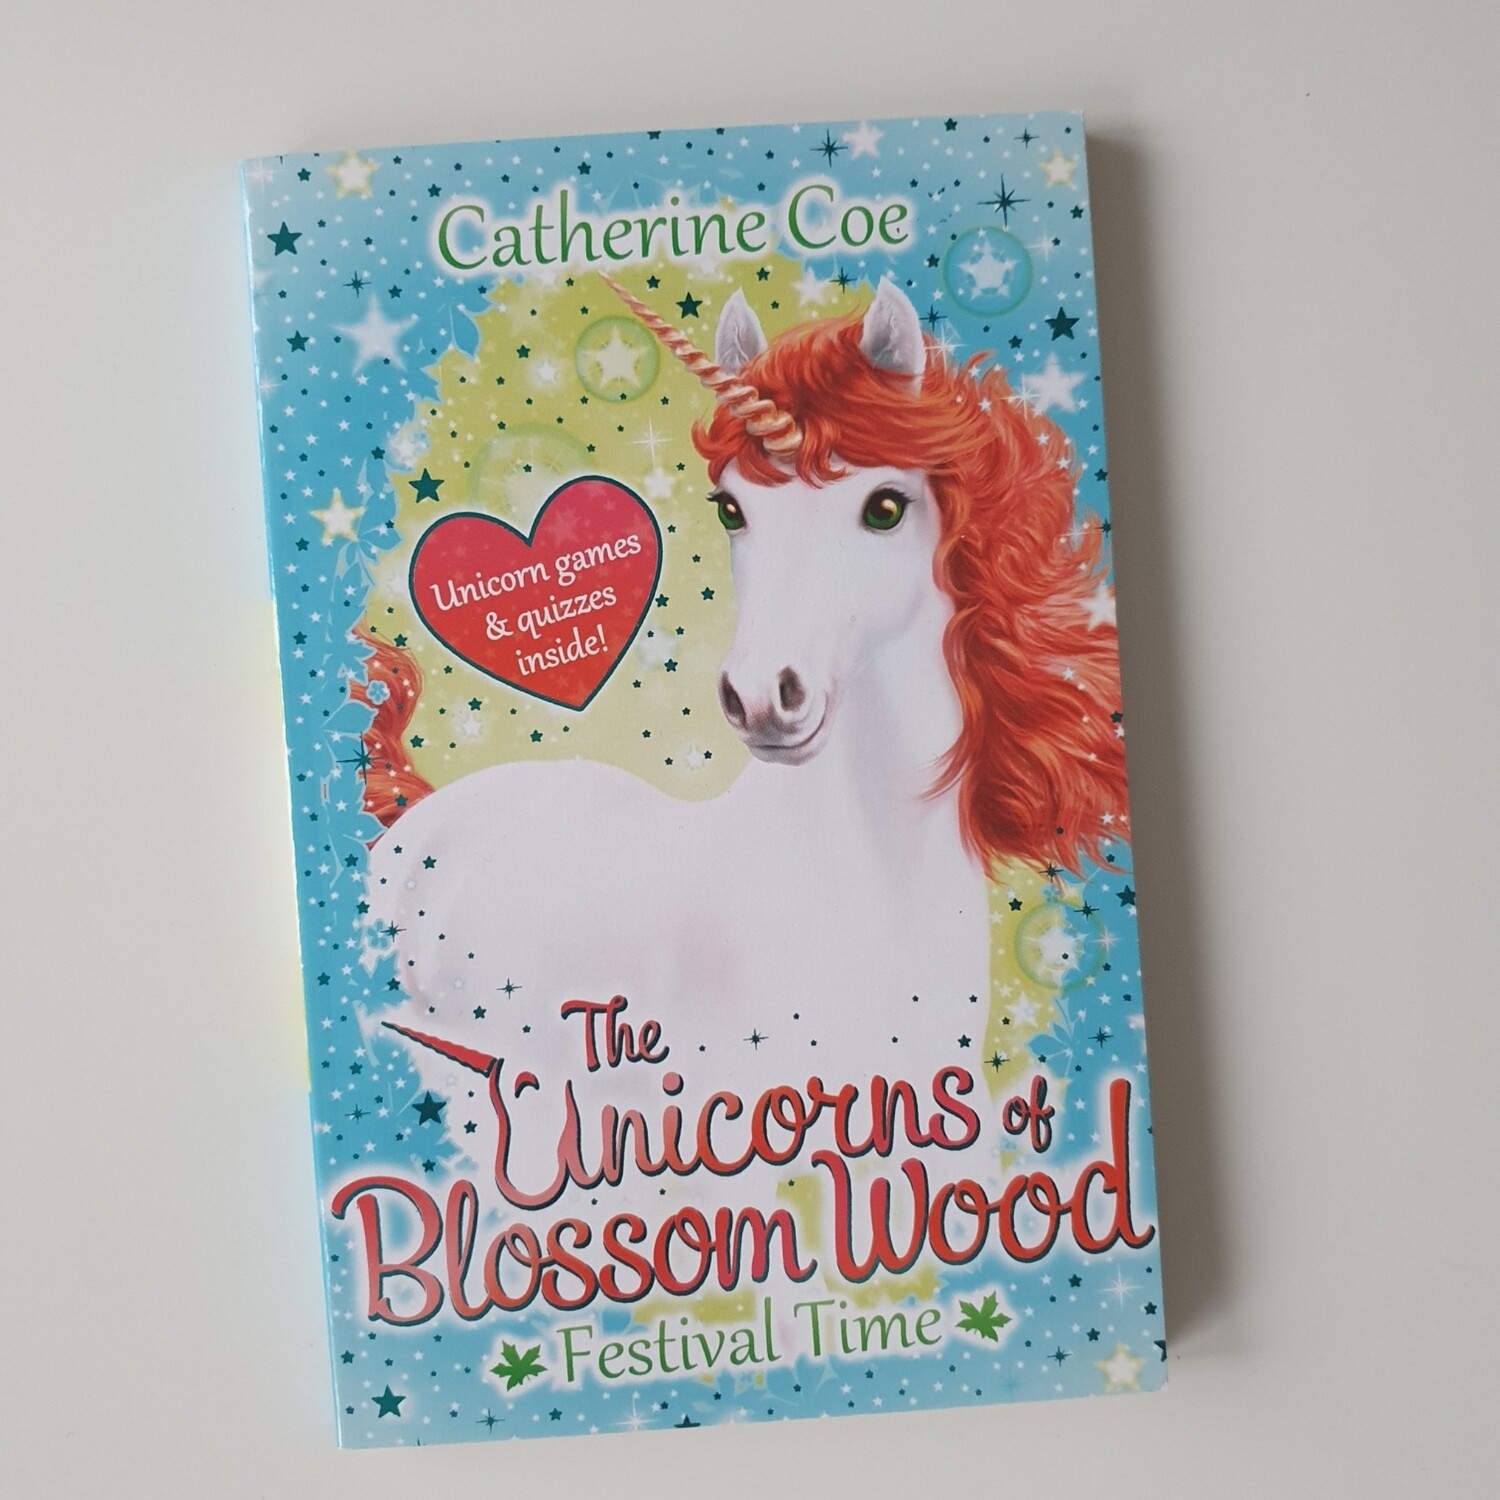 The Unicorns of Blossom Wood Notebook - made from a paperback book